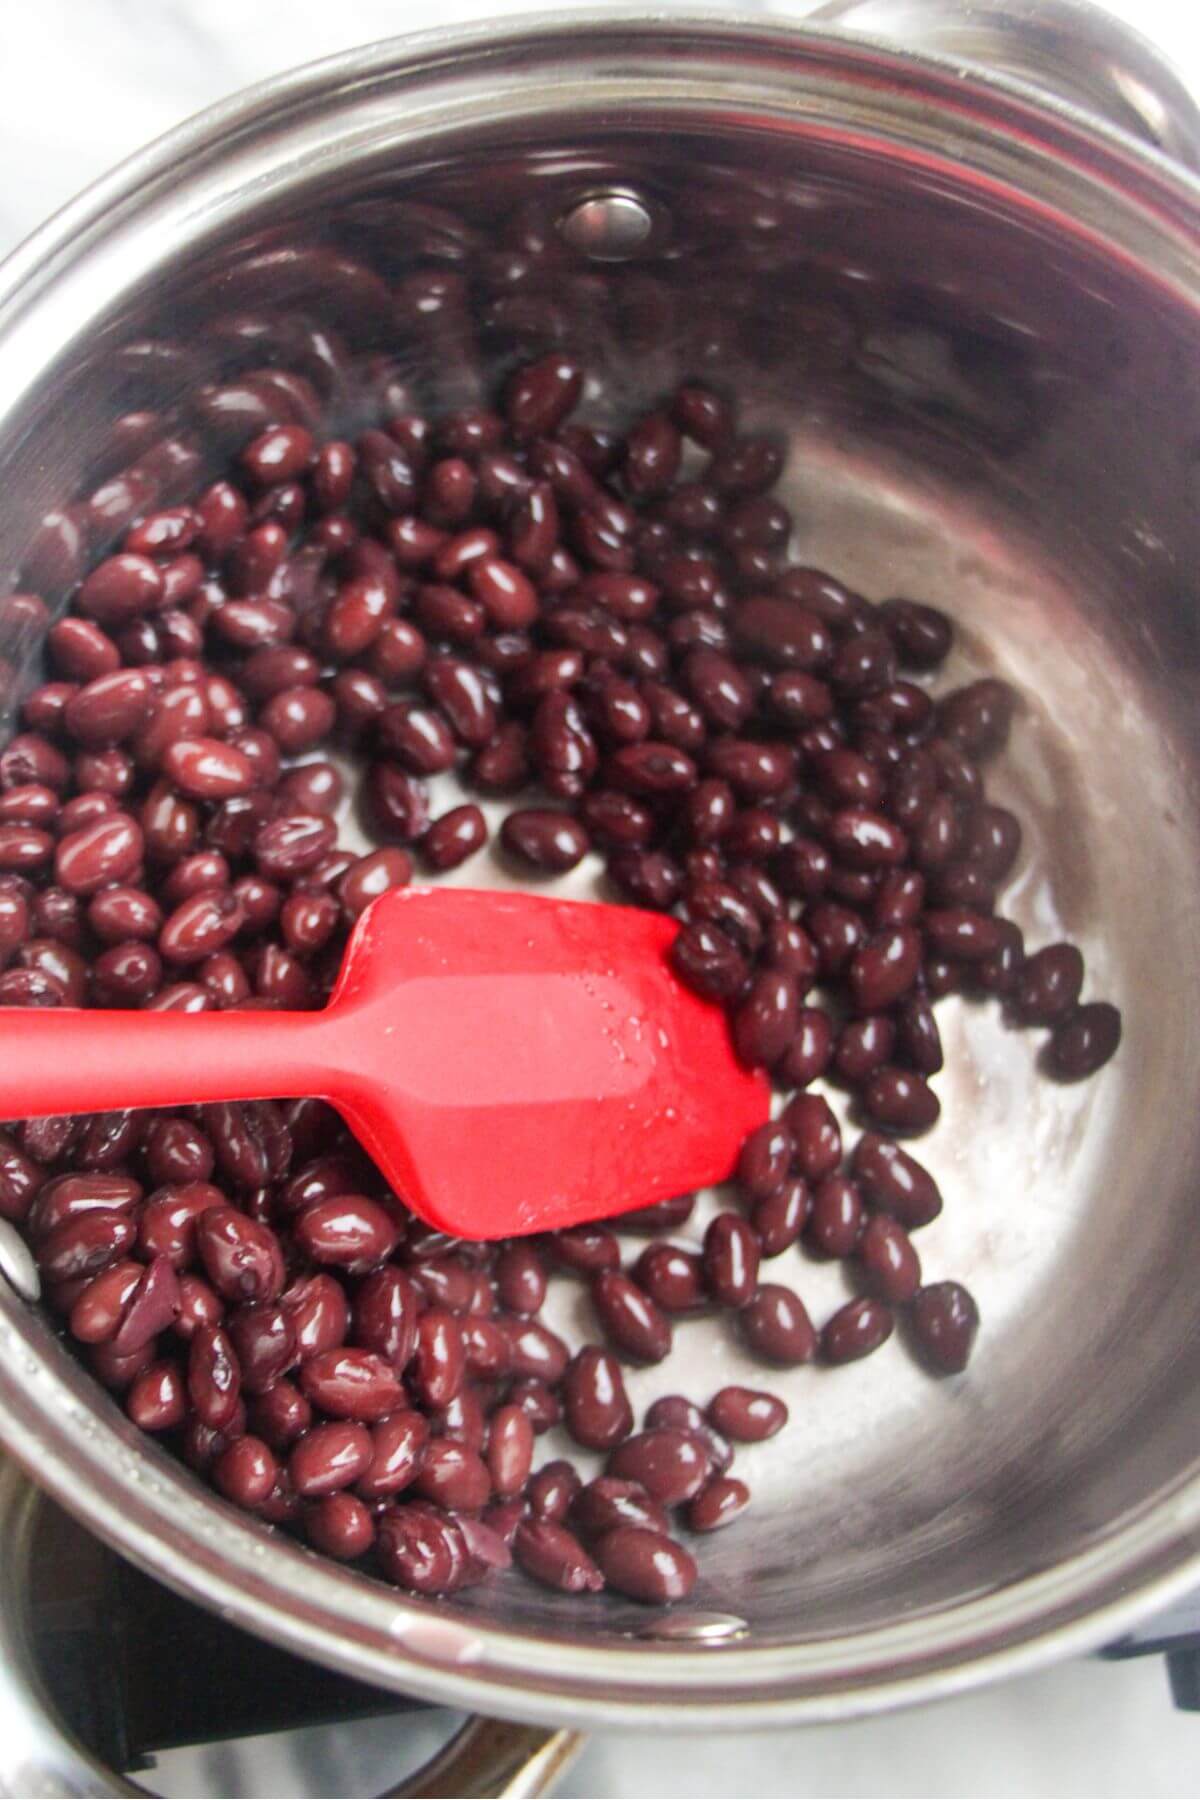 Small red spatula stirring black beans in a small silver pot.